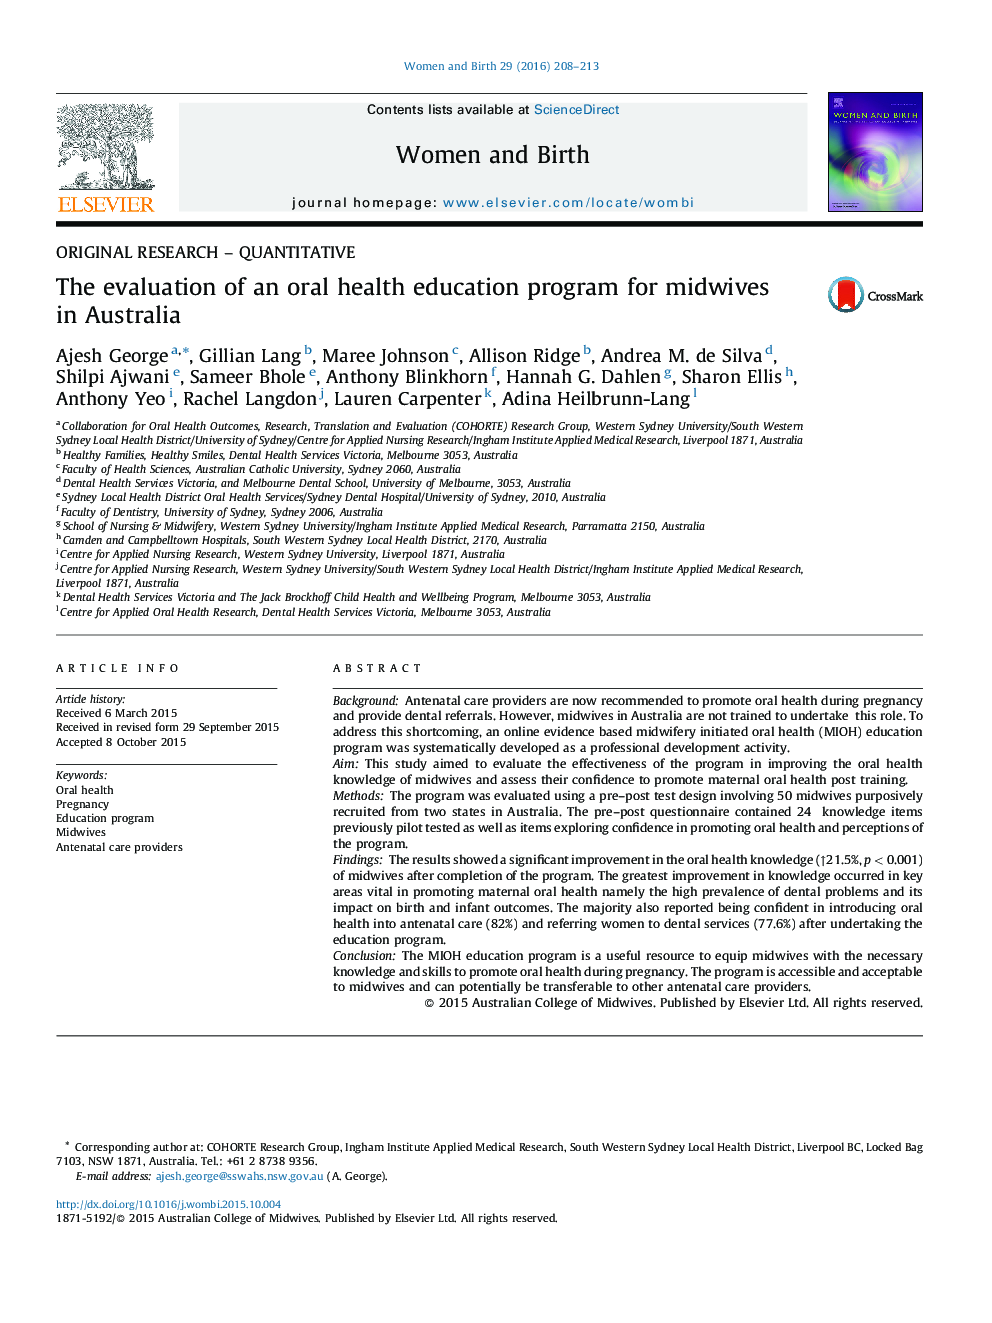 ORIGINAL RESEARCH - QUANTITATIVEThe evaluation of an oral health education program for midwives in Australia